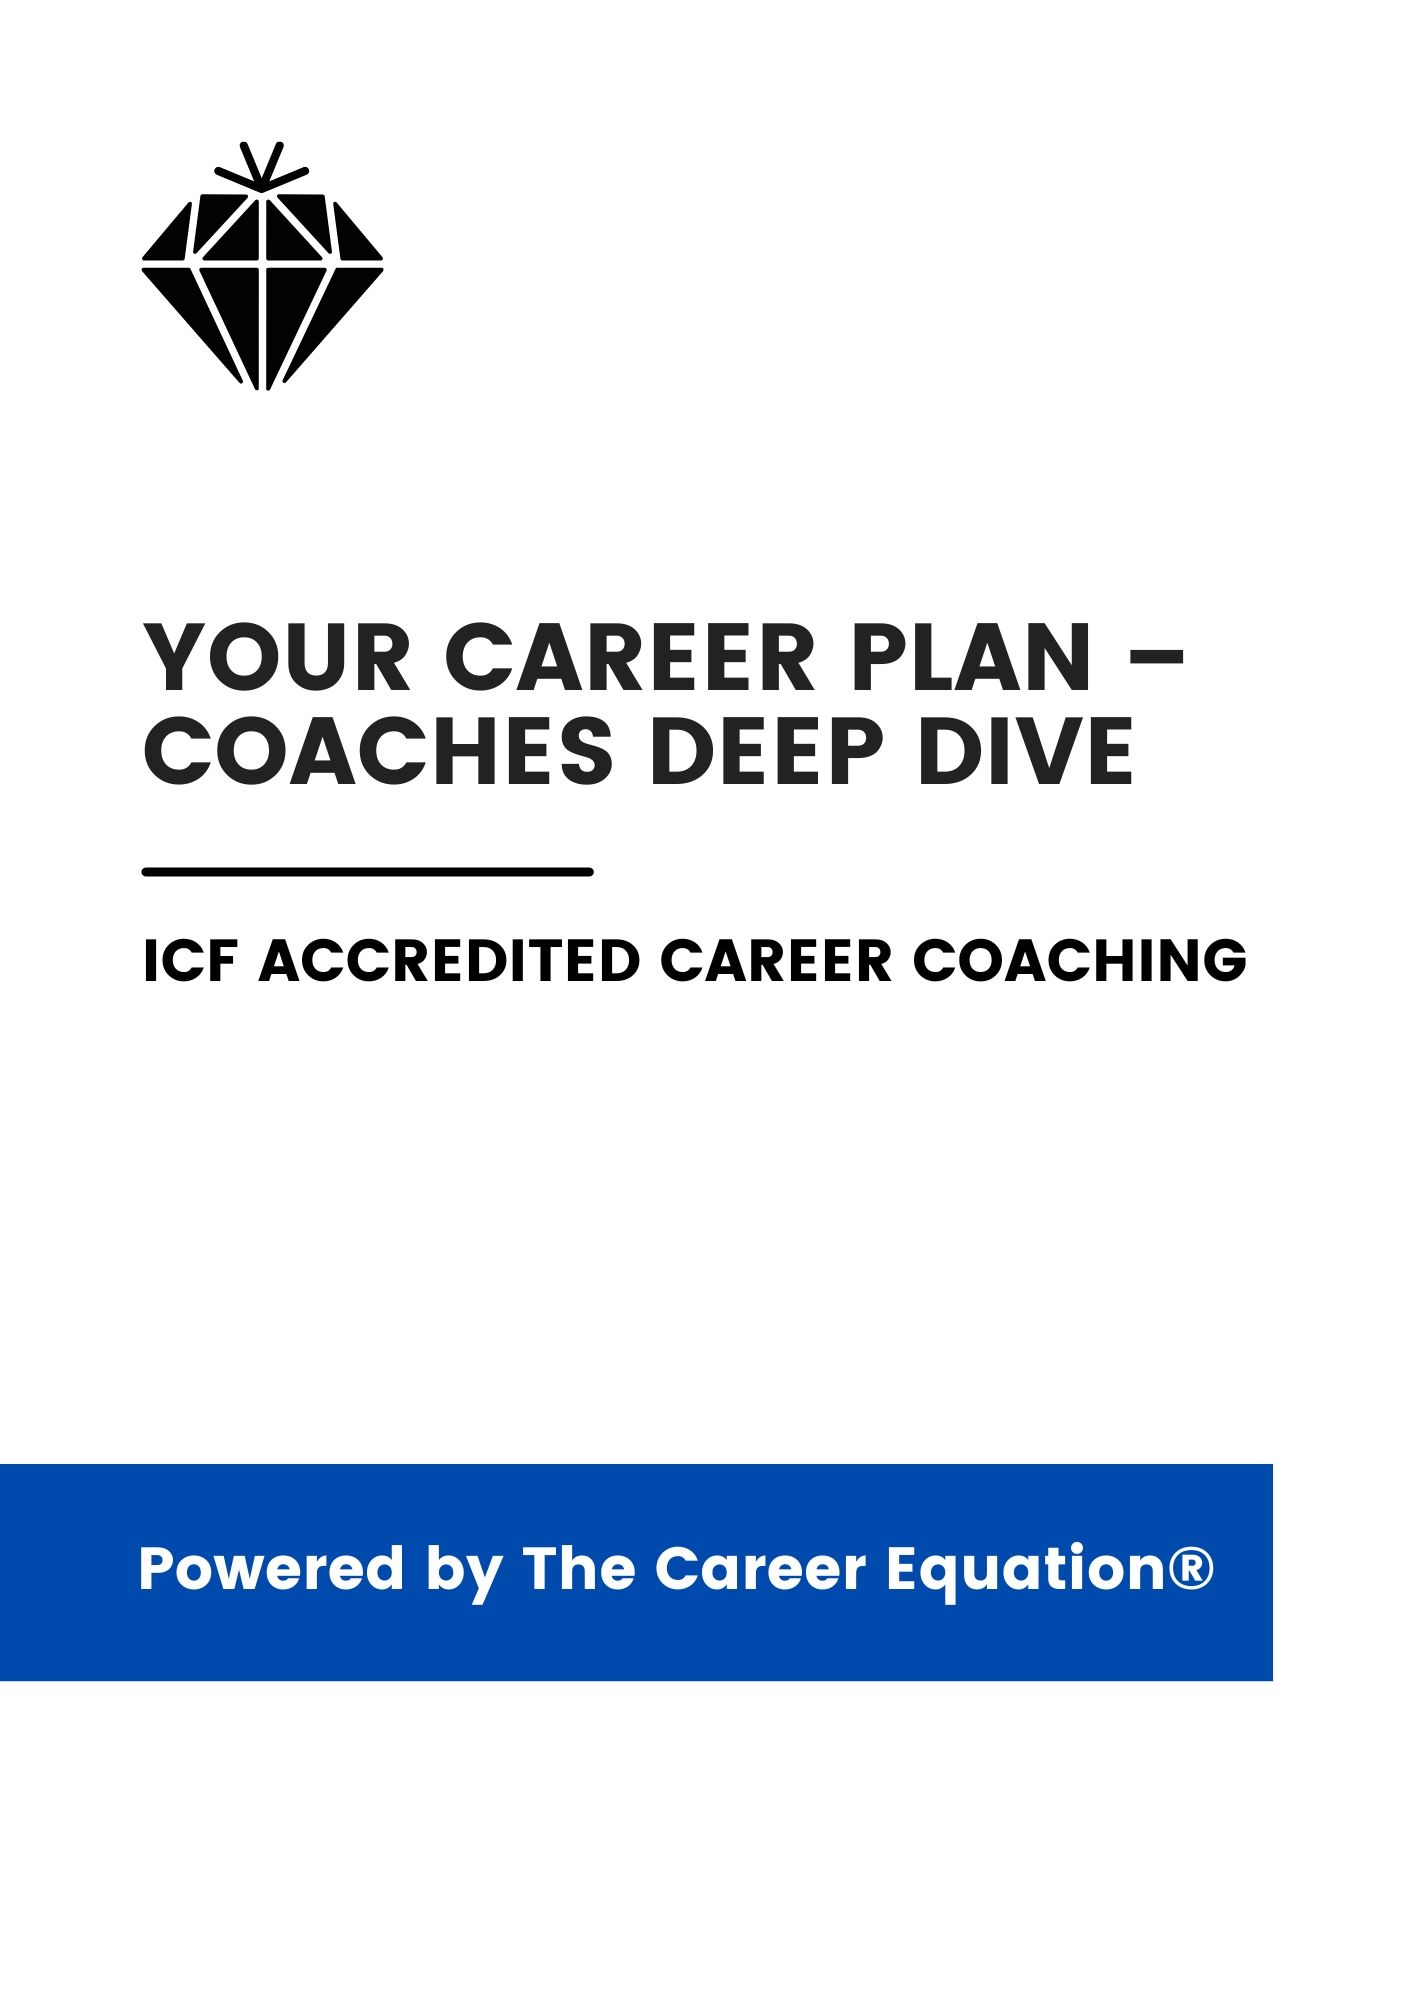 The cover of a book titled your career plan - coaches deep dive.